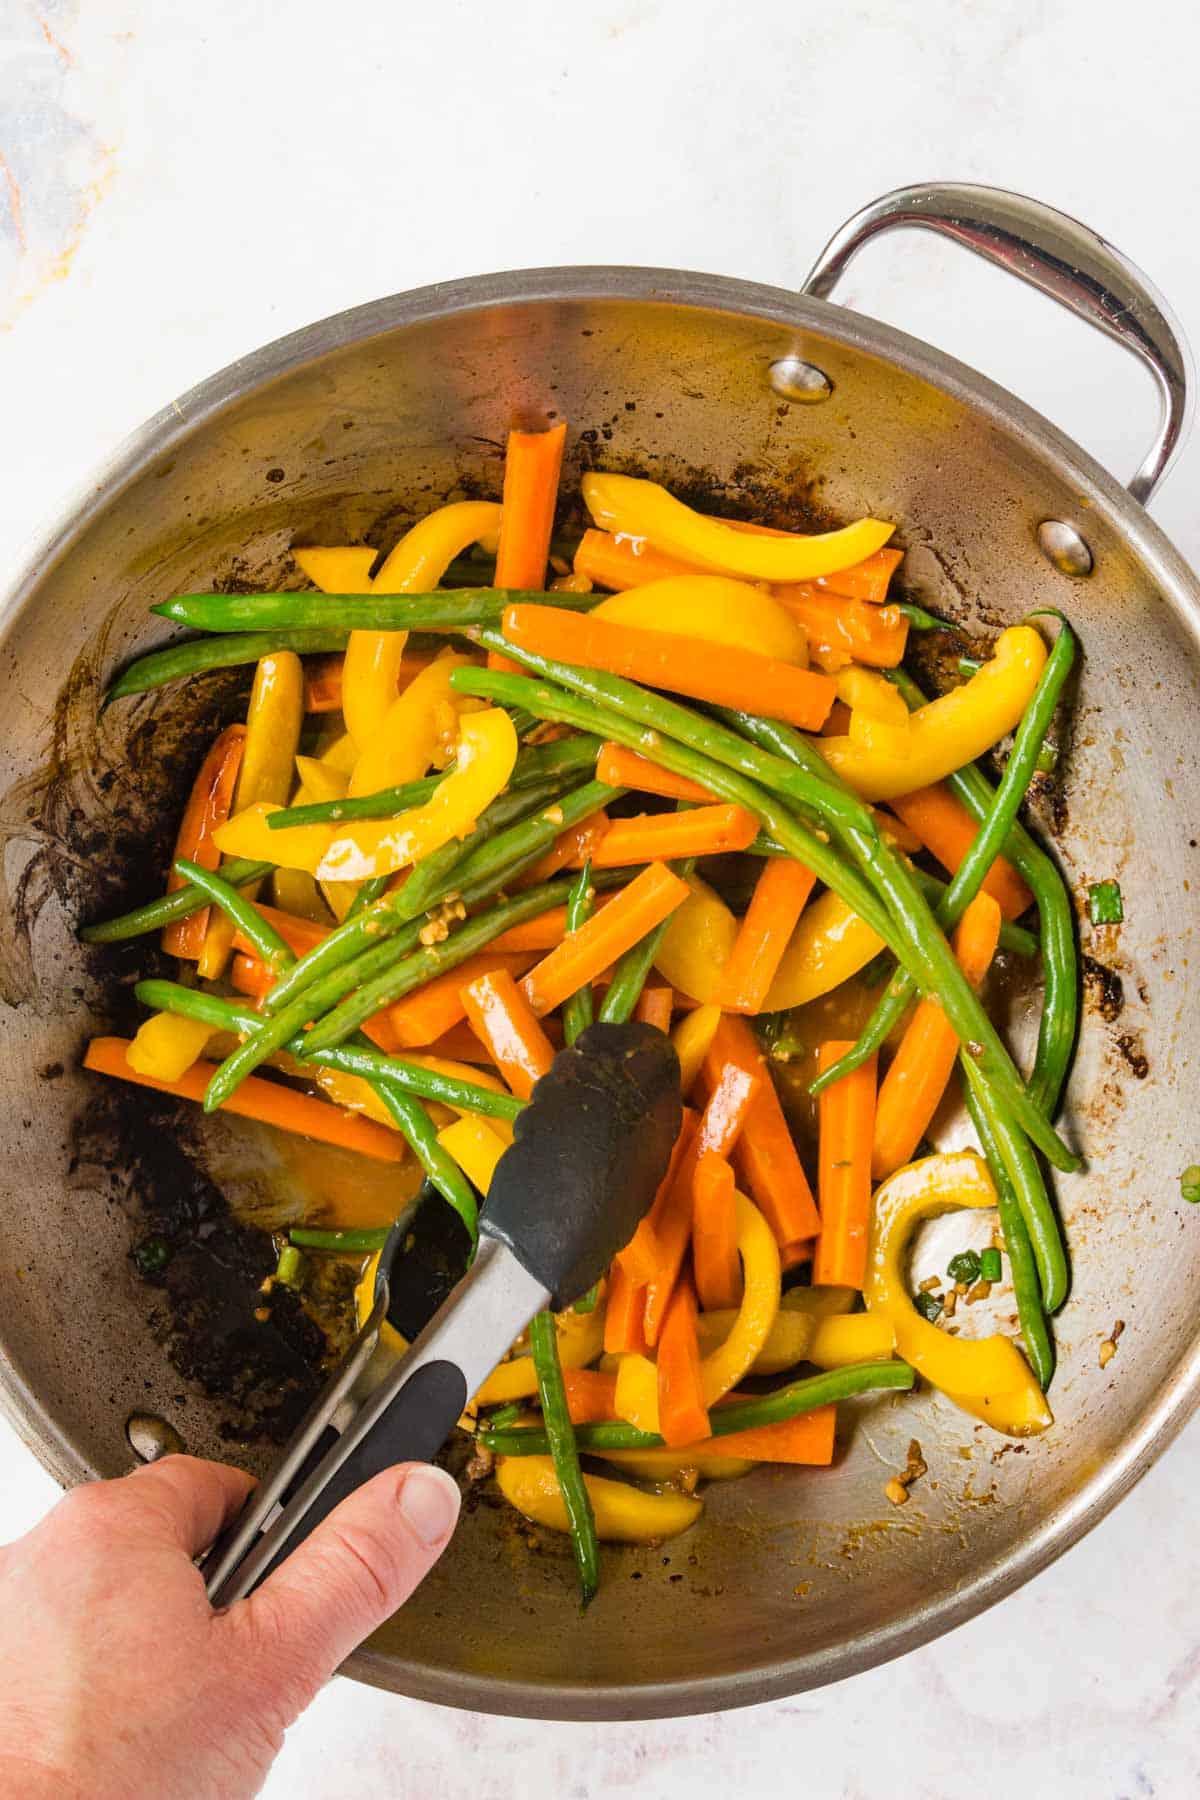 Tossing the veggies in a wok using tongs.